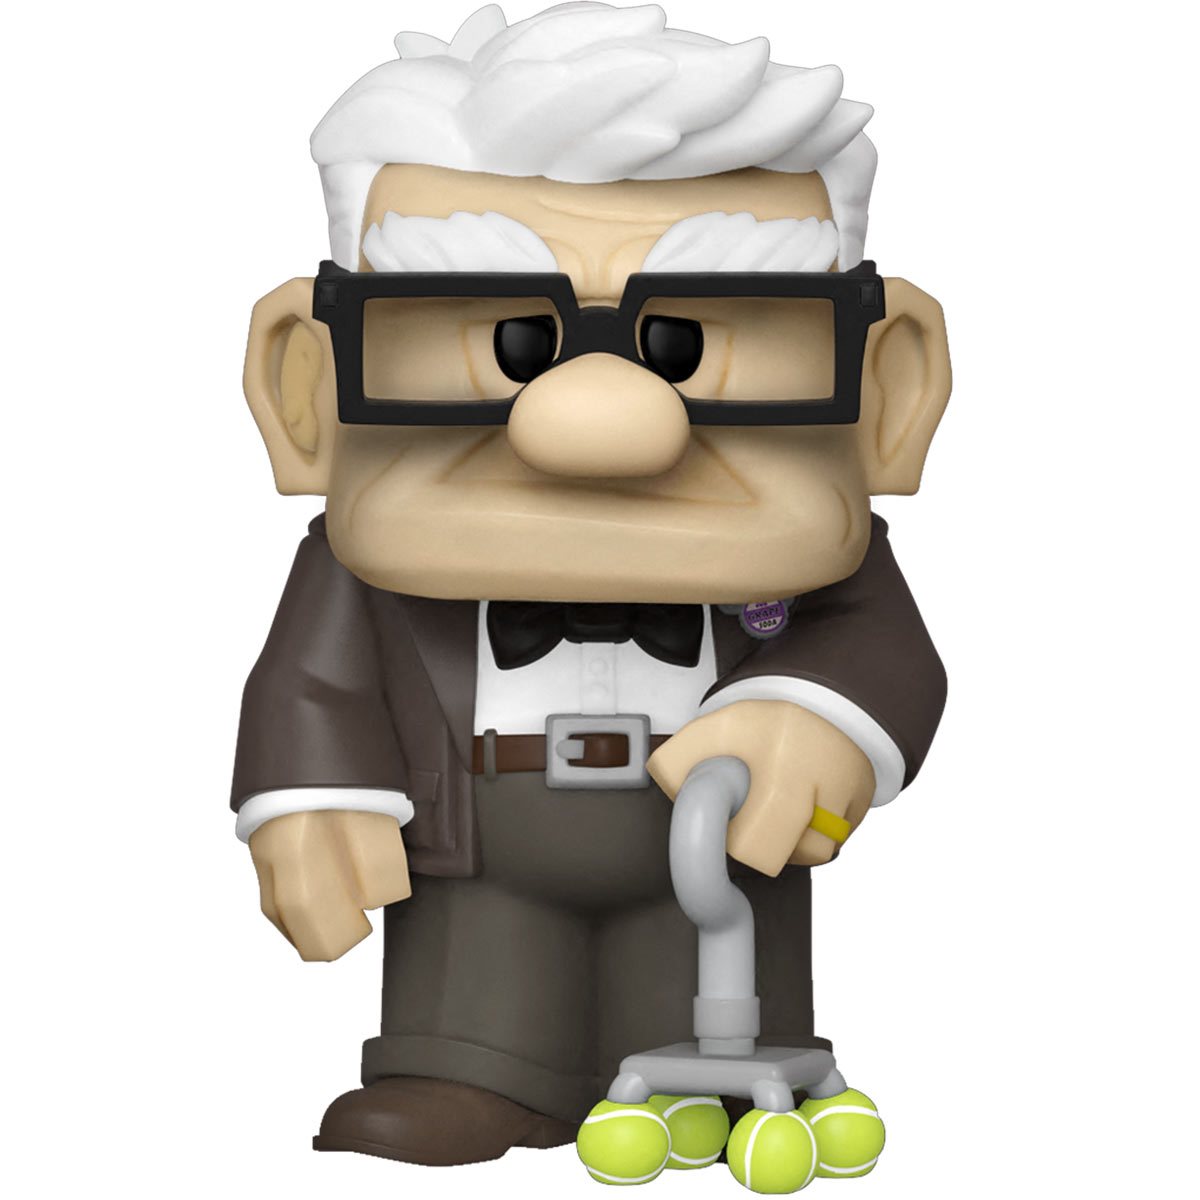 Funko Soda Disney Pixar Up: Russell Vinyl Figure with Chase 